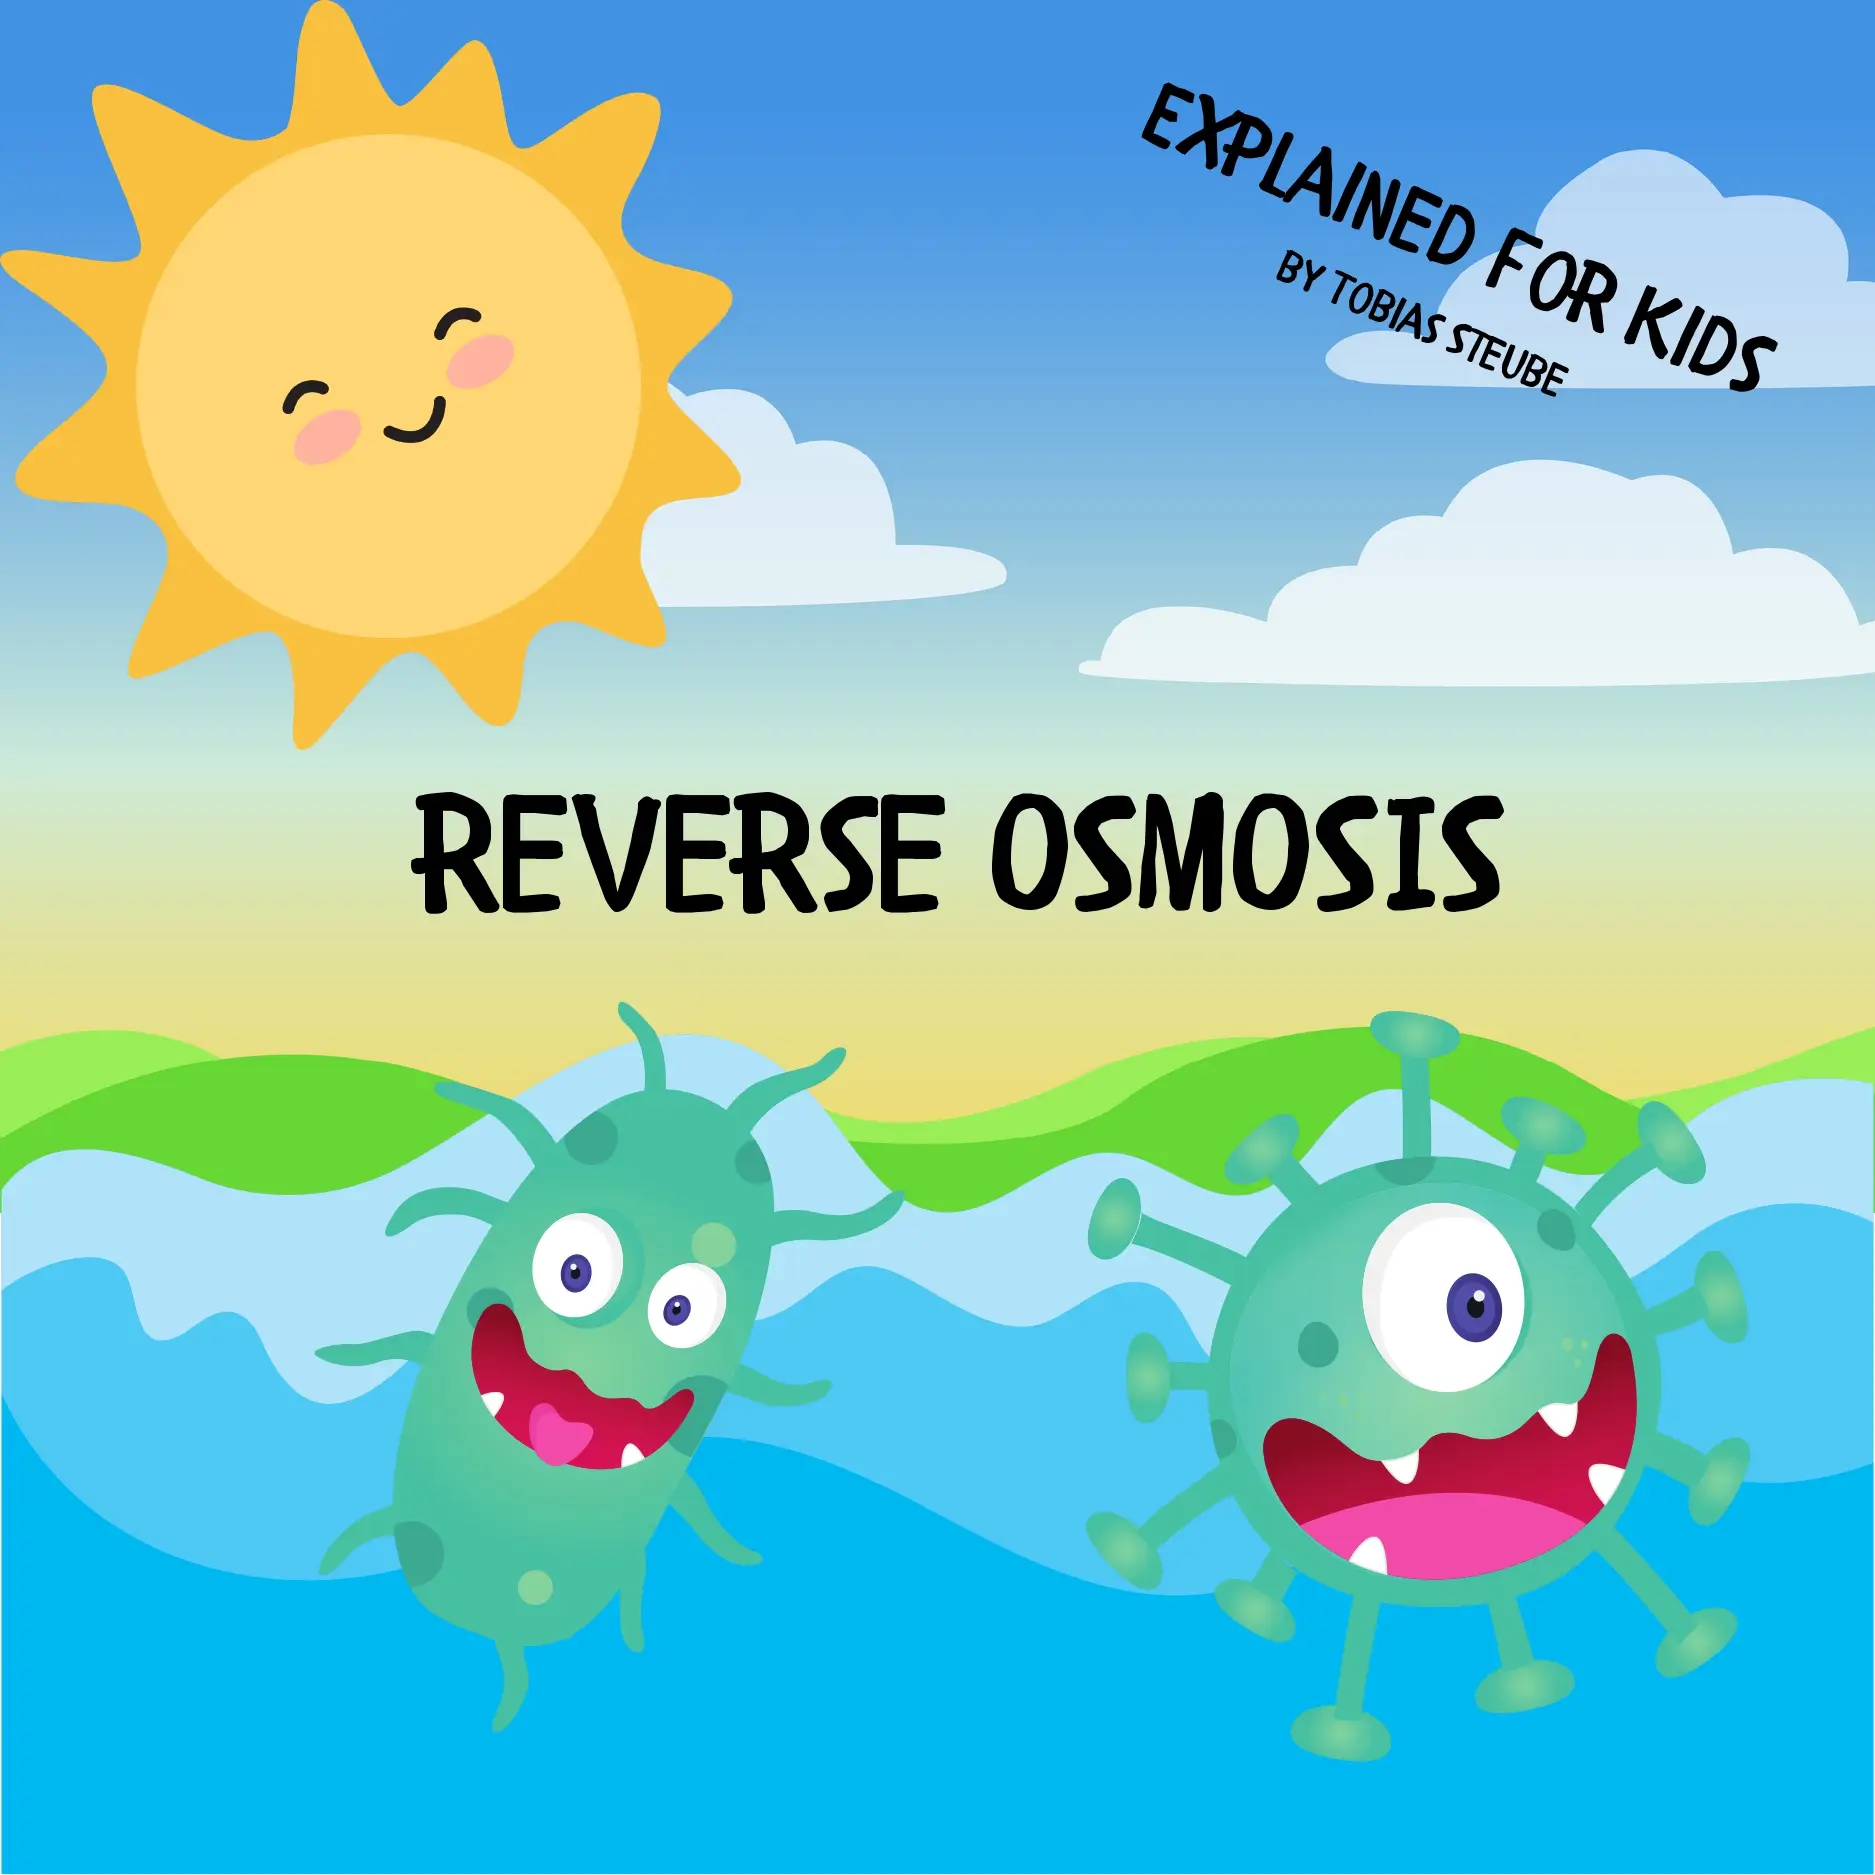 Reverse Osmosis- Explained for Kids